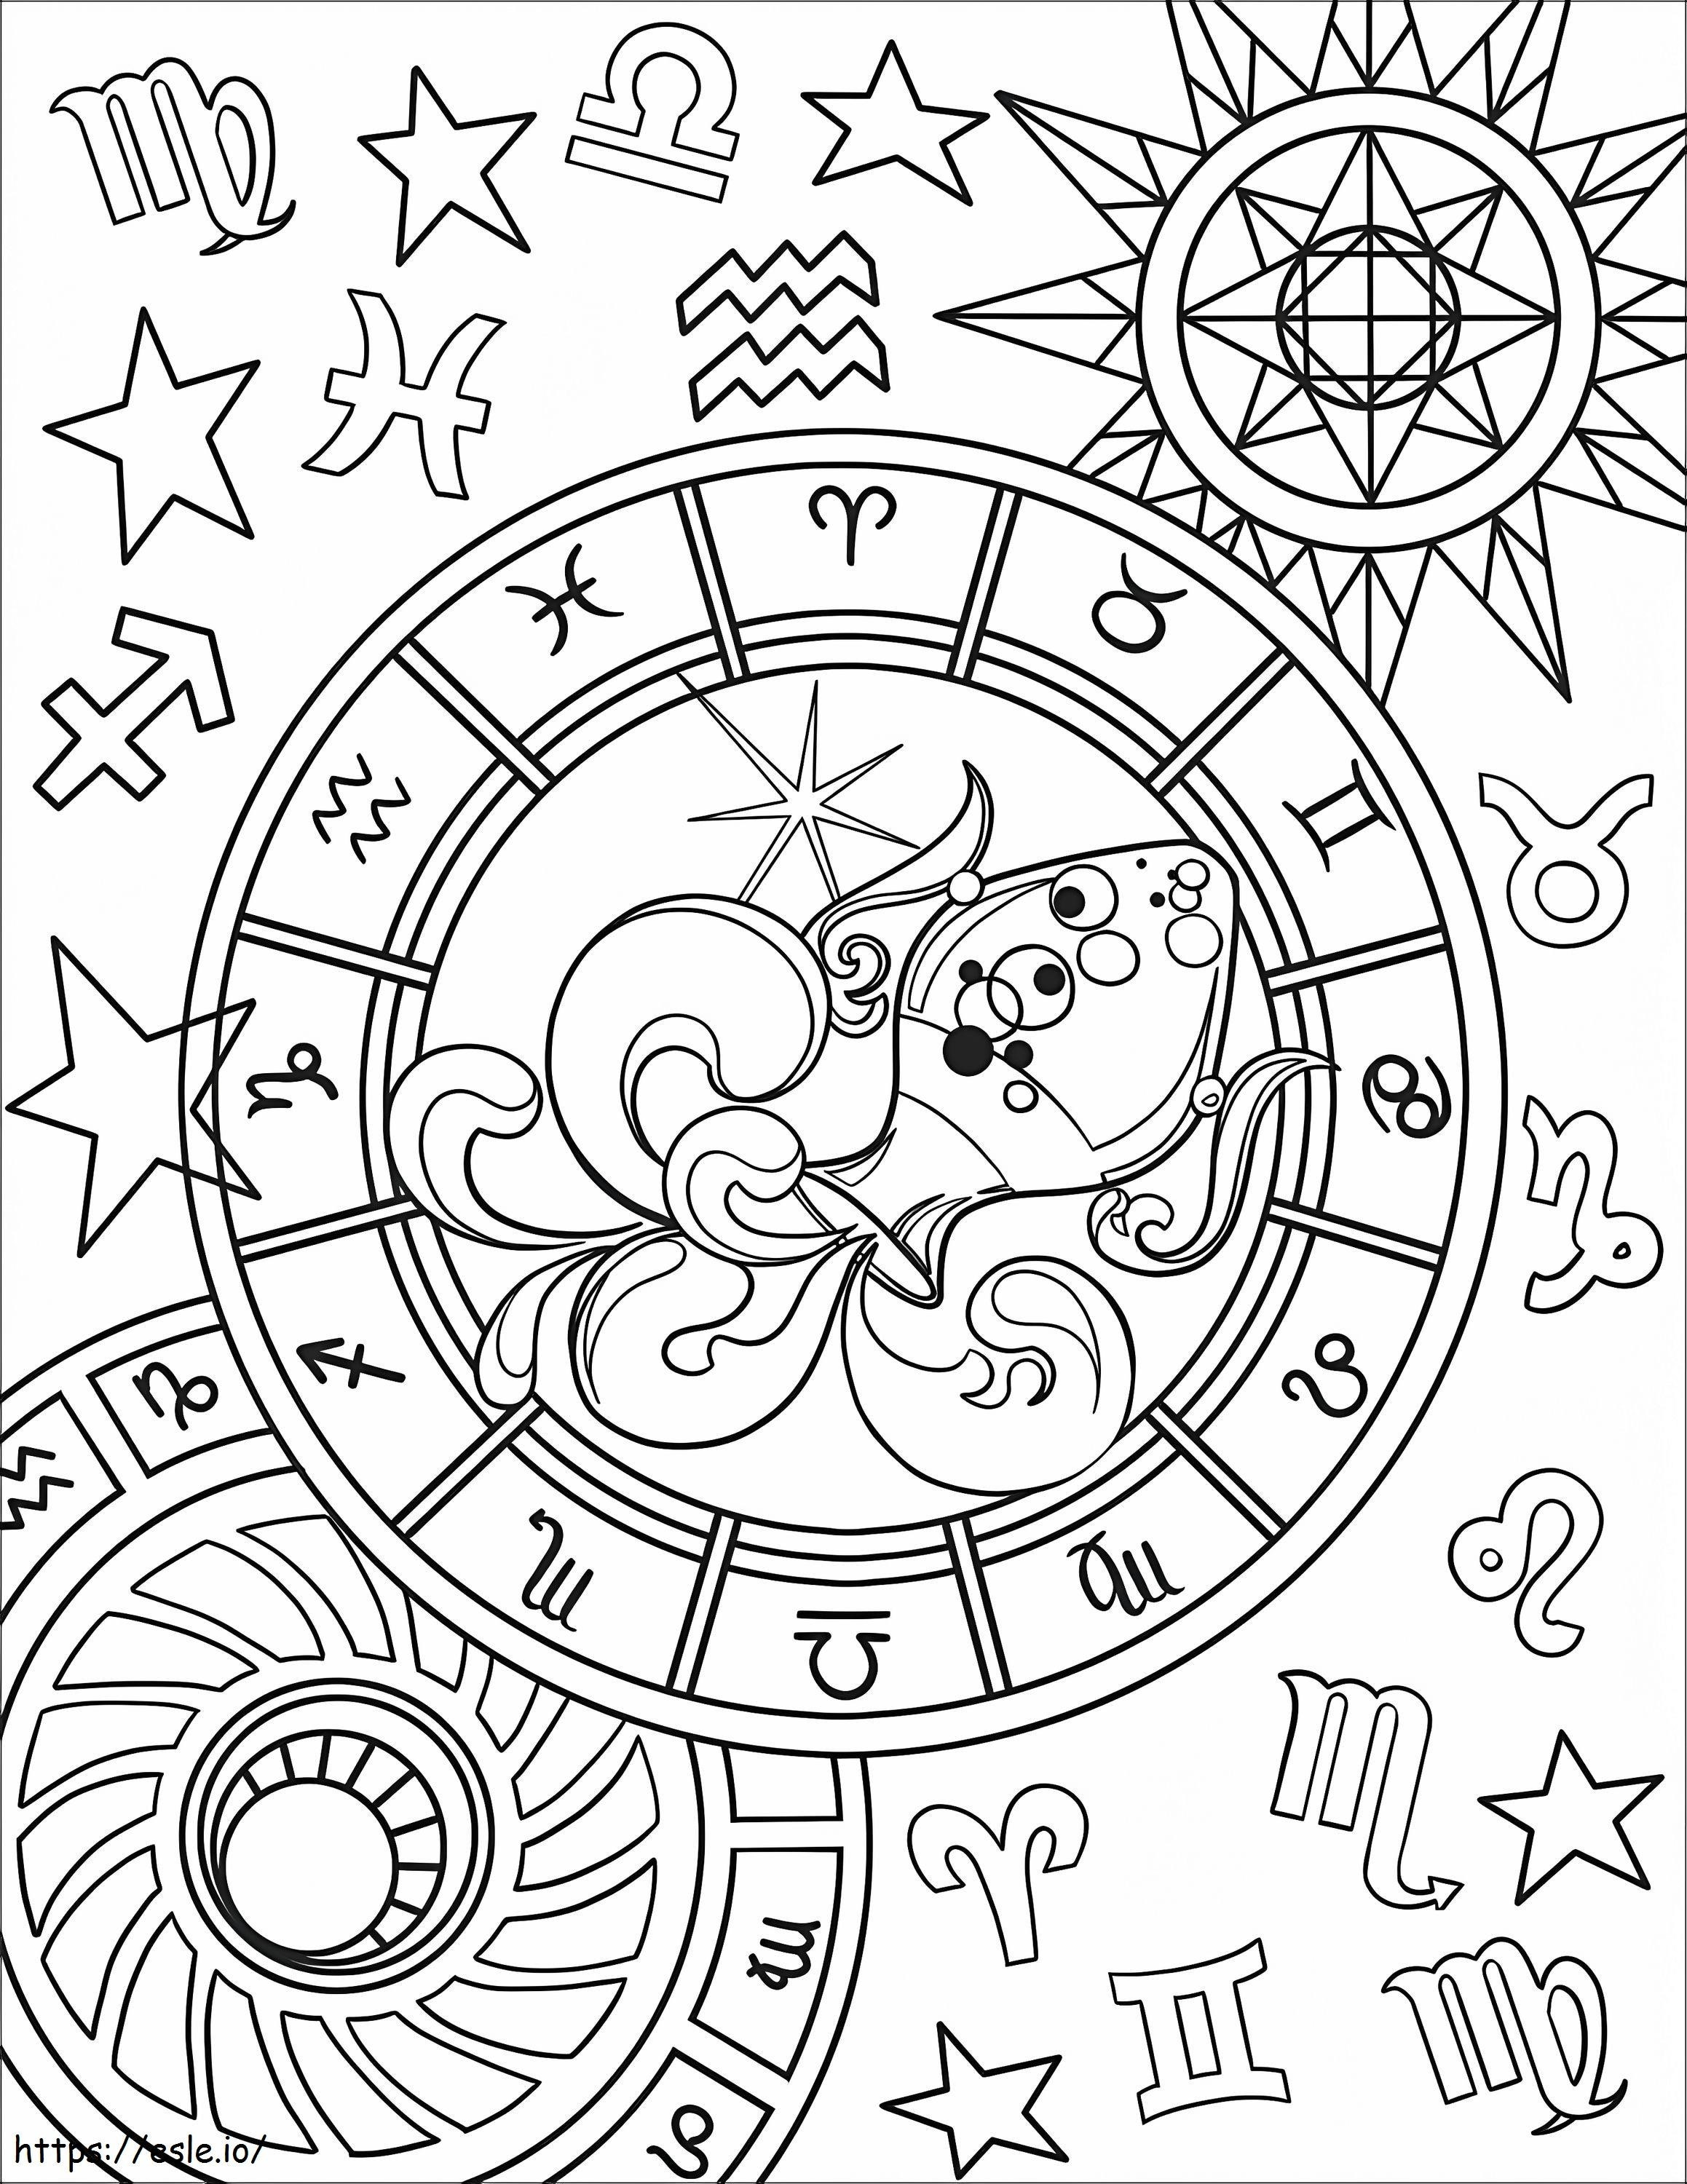 1597710055 Qw1214 coloring page